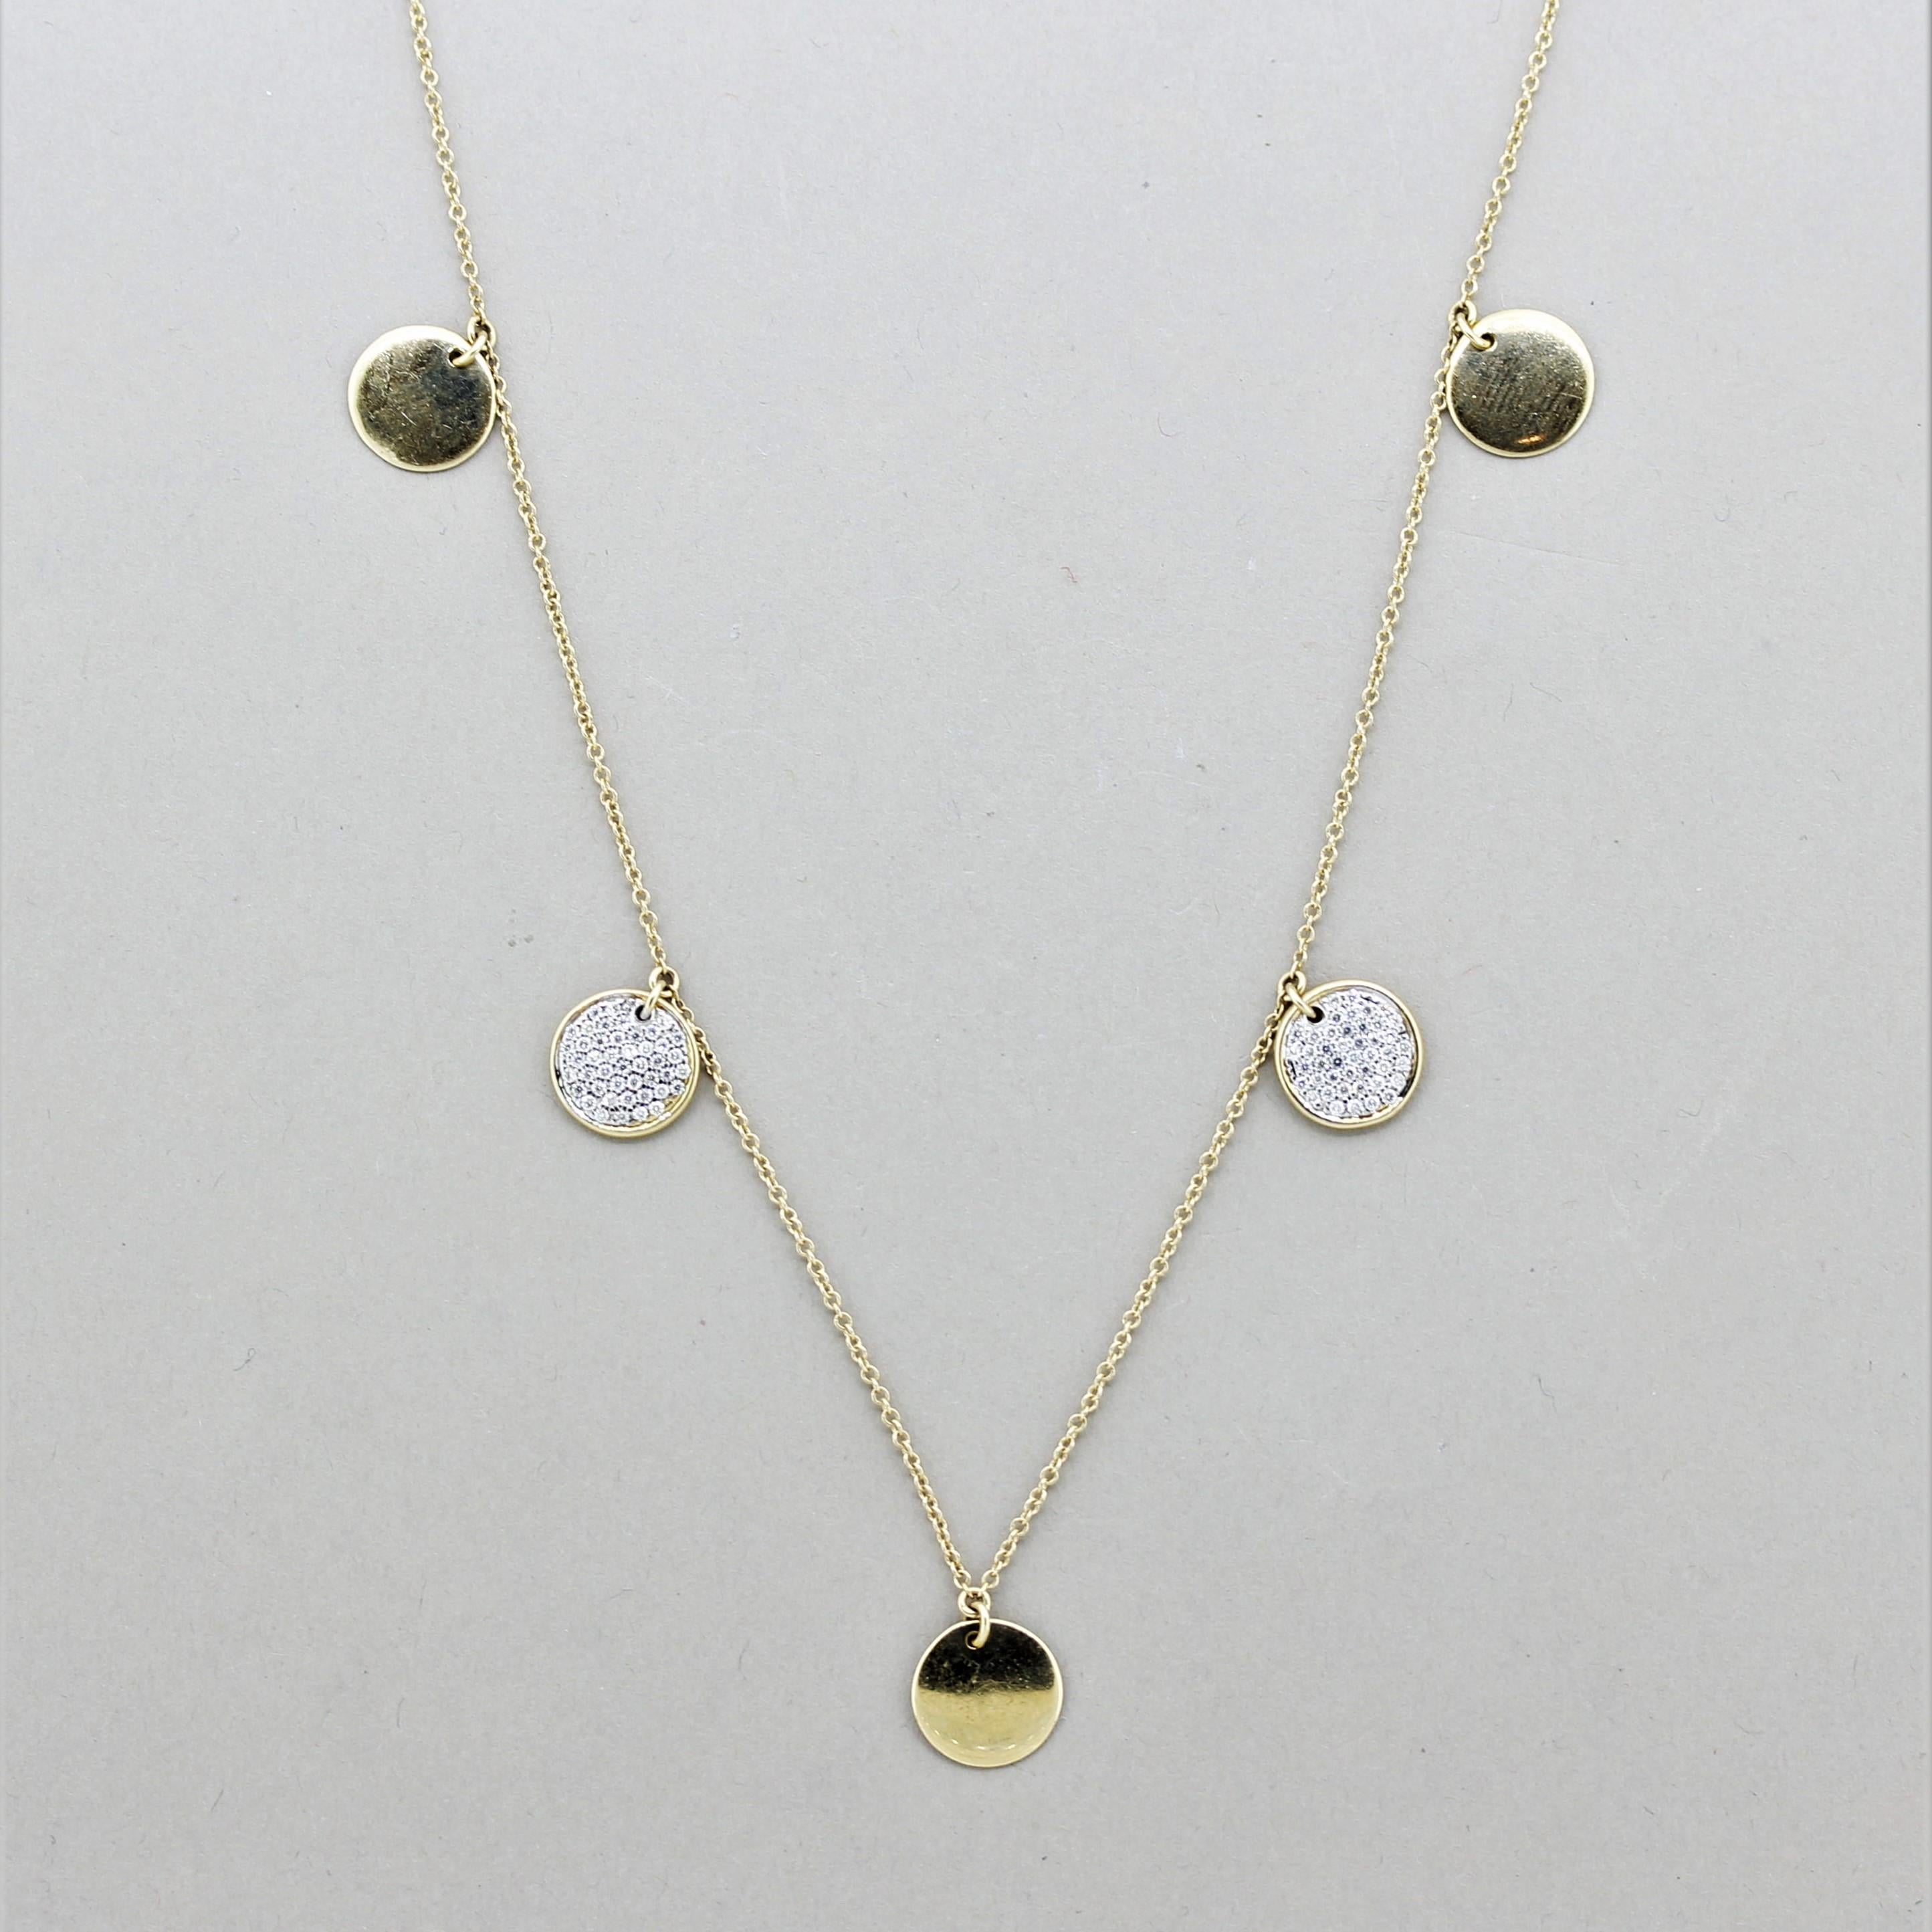 A long and stylish necklace featuring 1.46 carats of round brilliant-cut diamonds. There are 9 gold disks with 4 of them studded with pave-set diamonds. Made in 14k yellow gold and 28 inches in length. Can be double stranded to wear as a